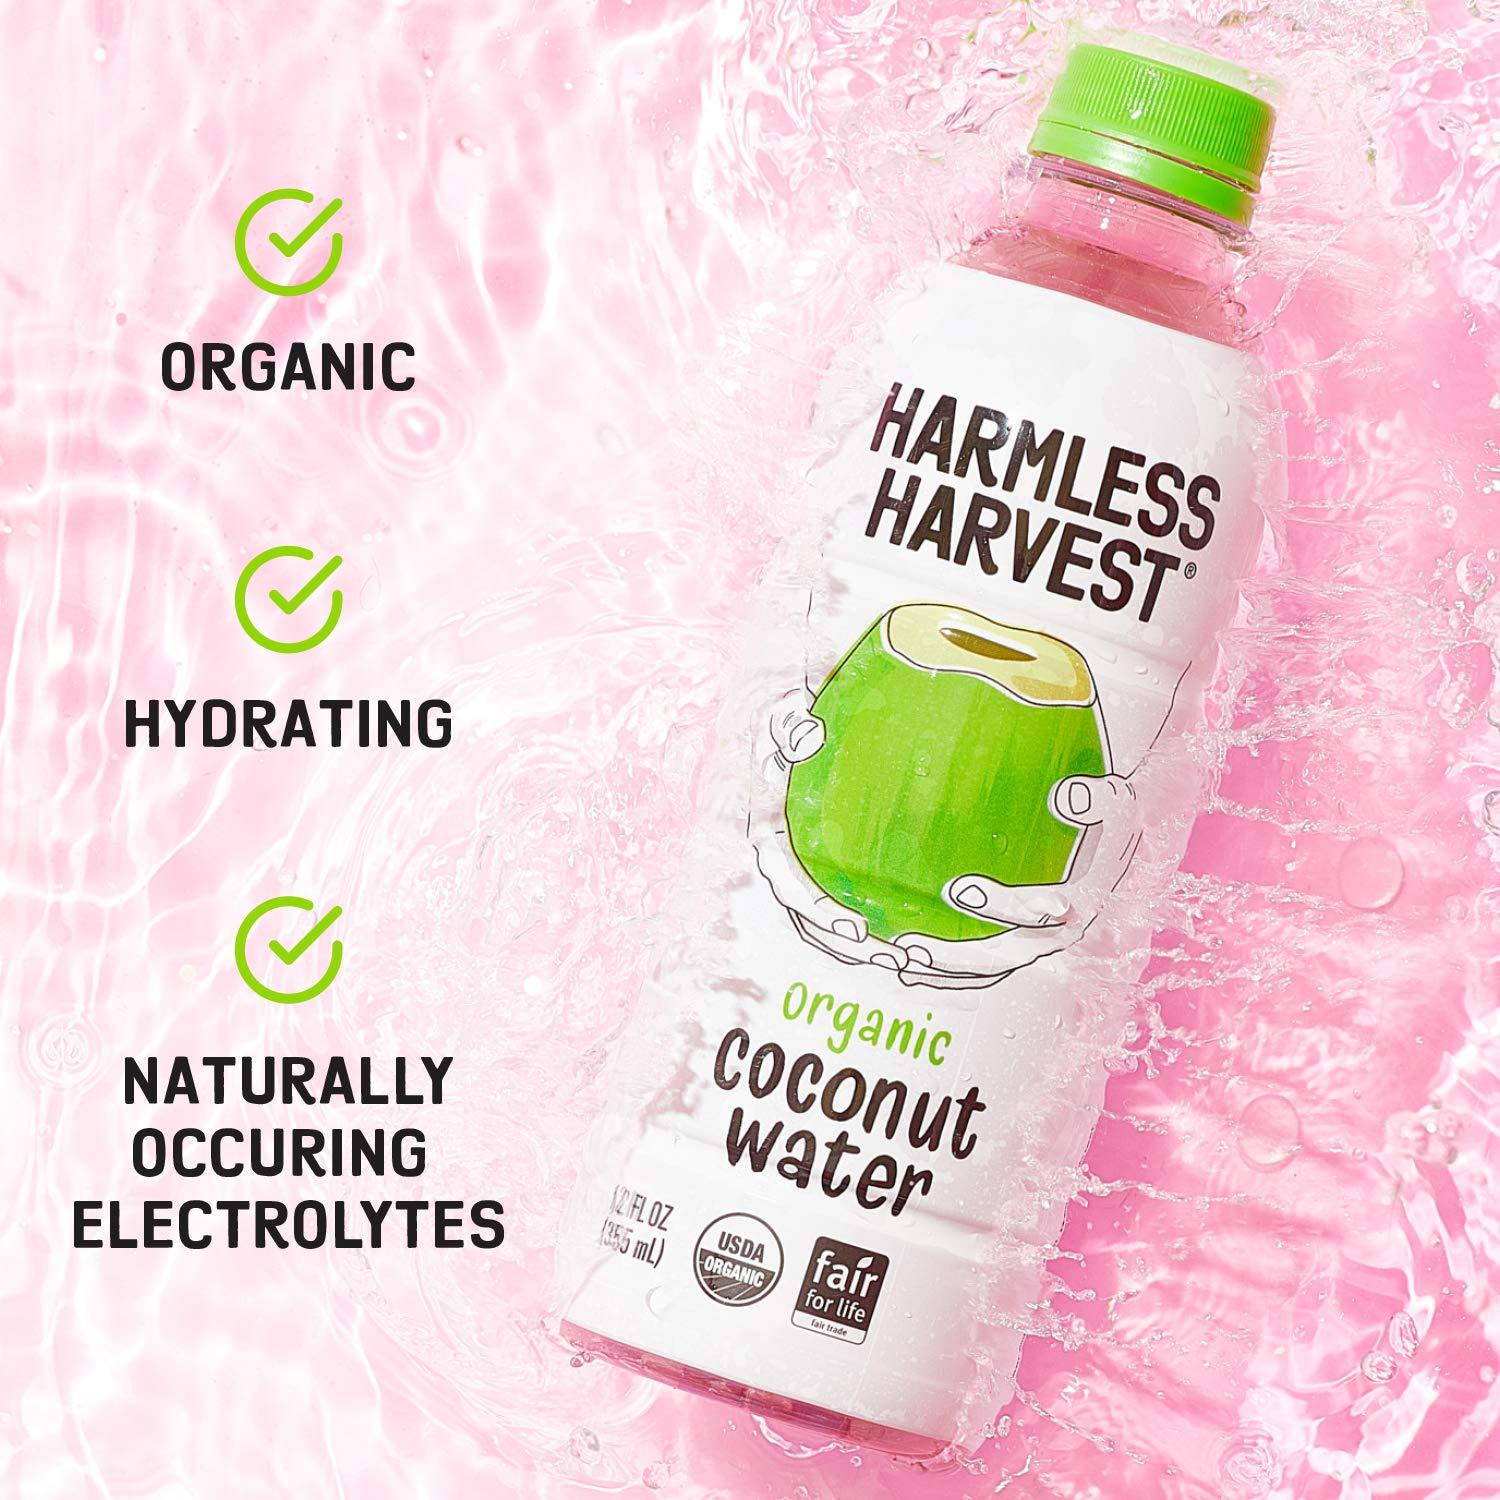 Harmless Harvest Organic Coconut Water Drink Hydrate With Natural